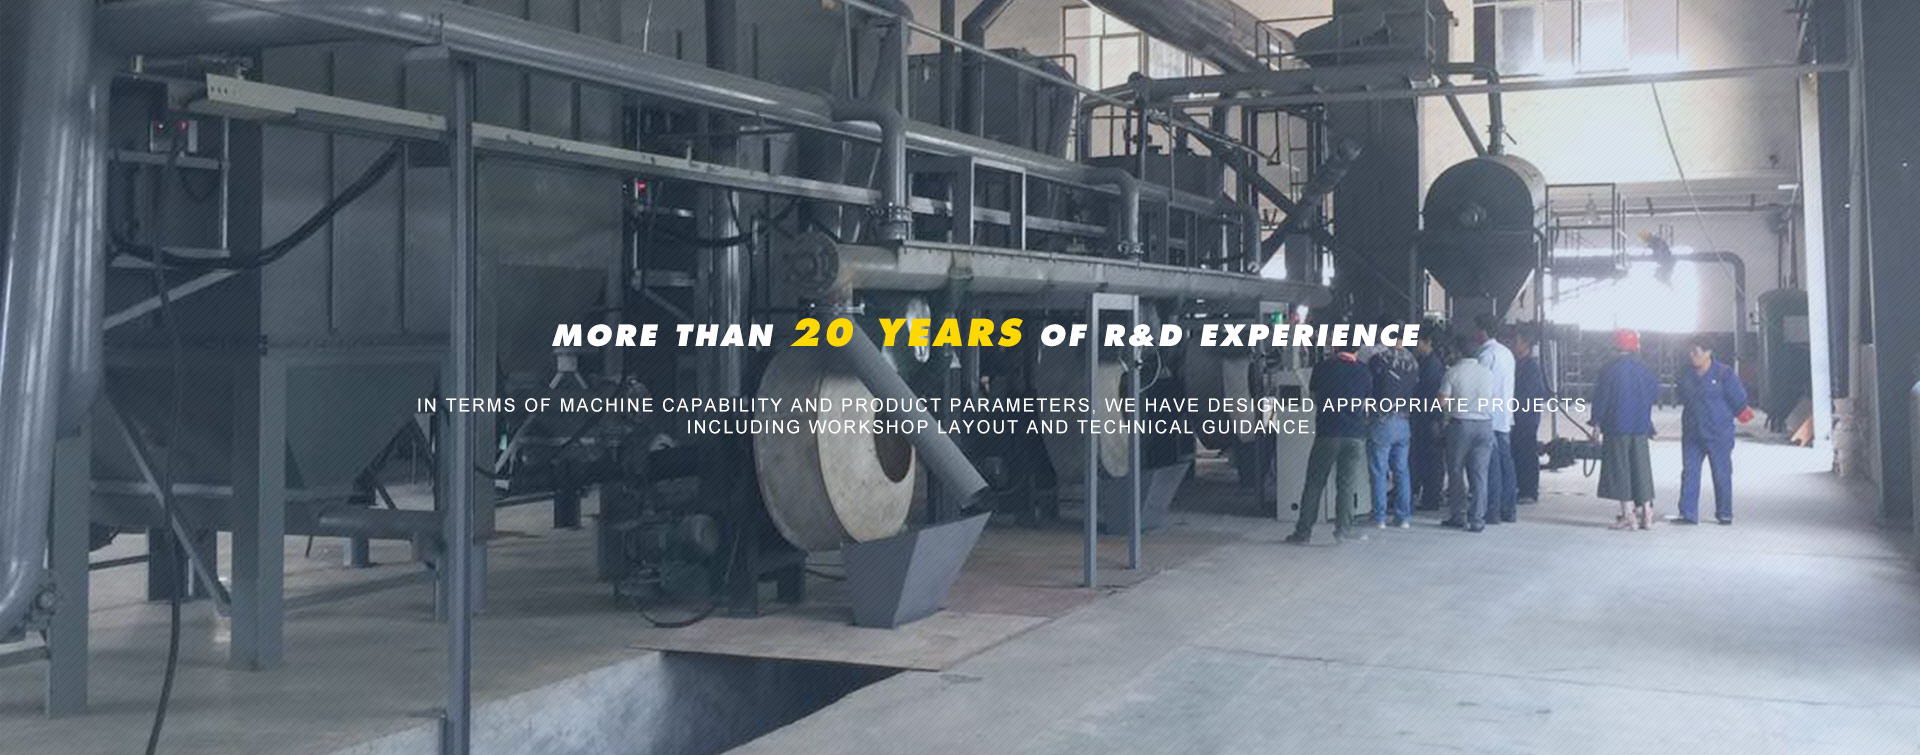 More than 20 years of R&D experience